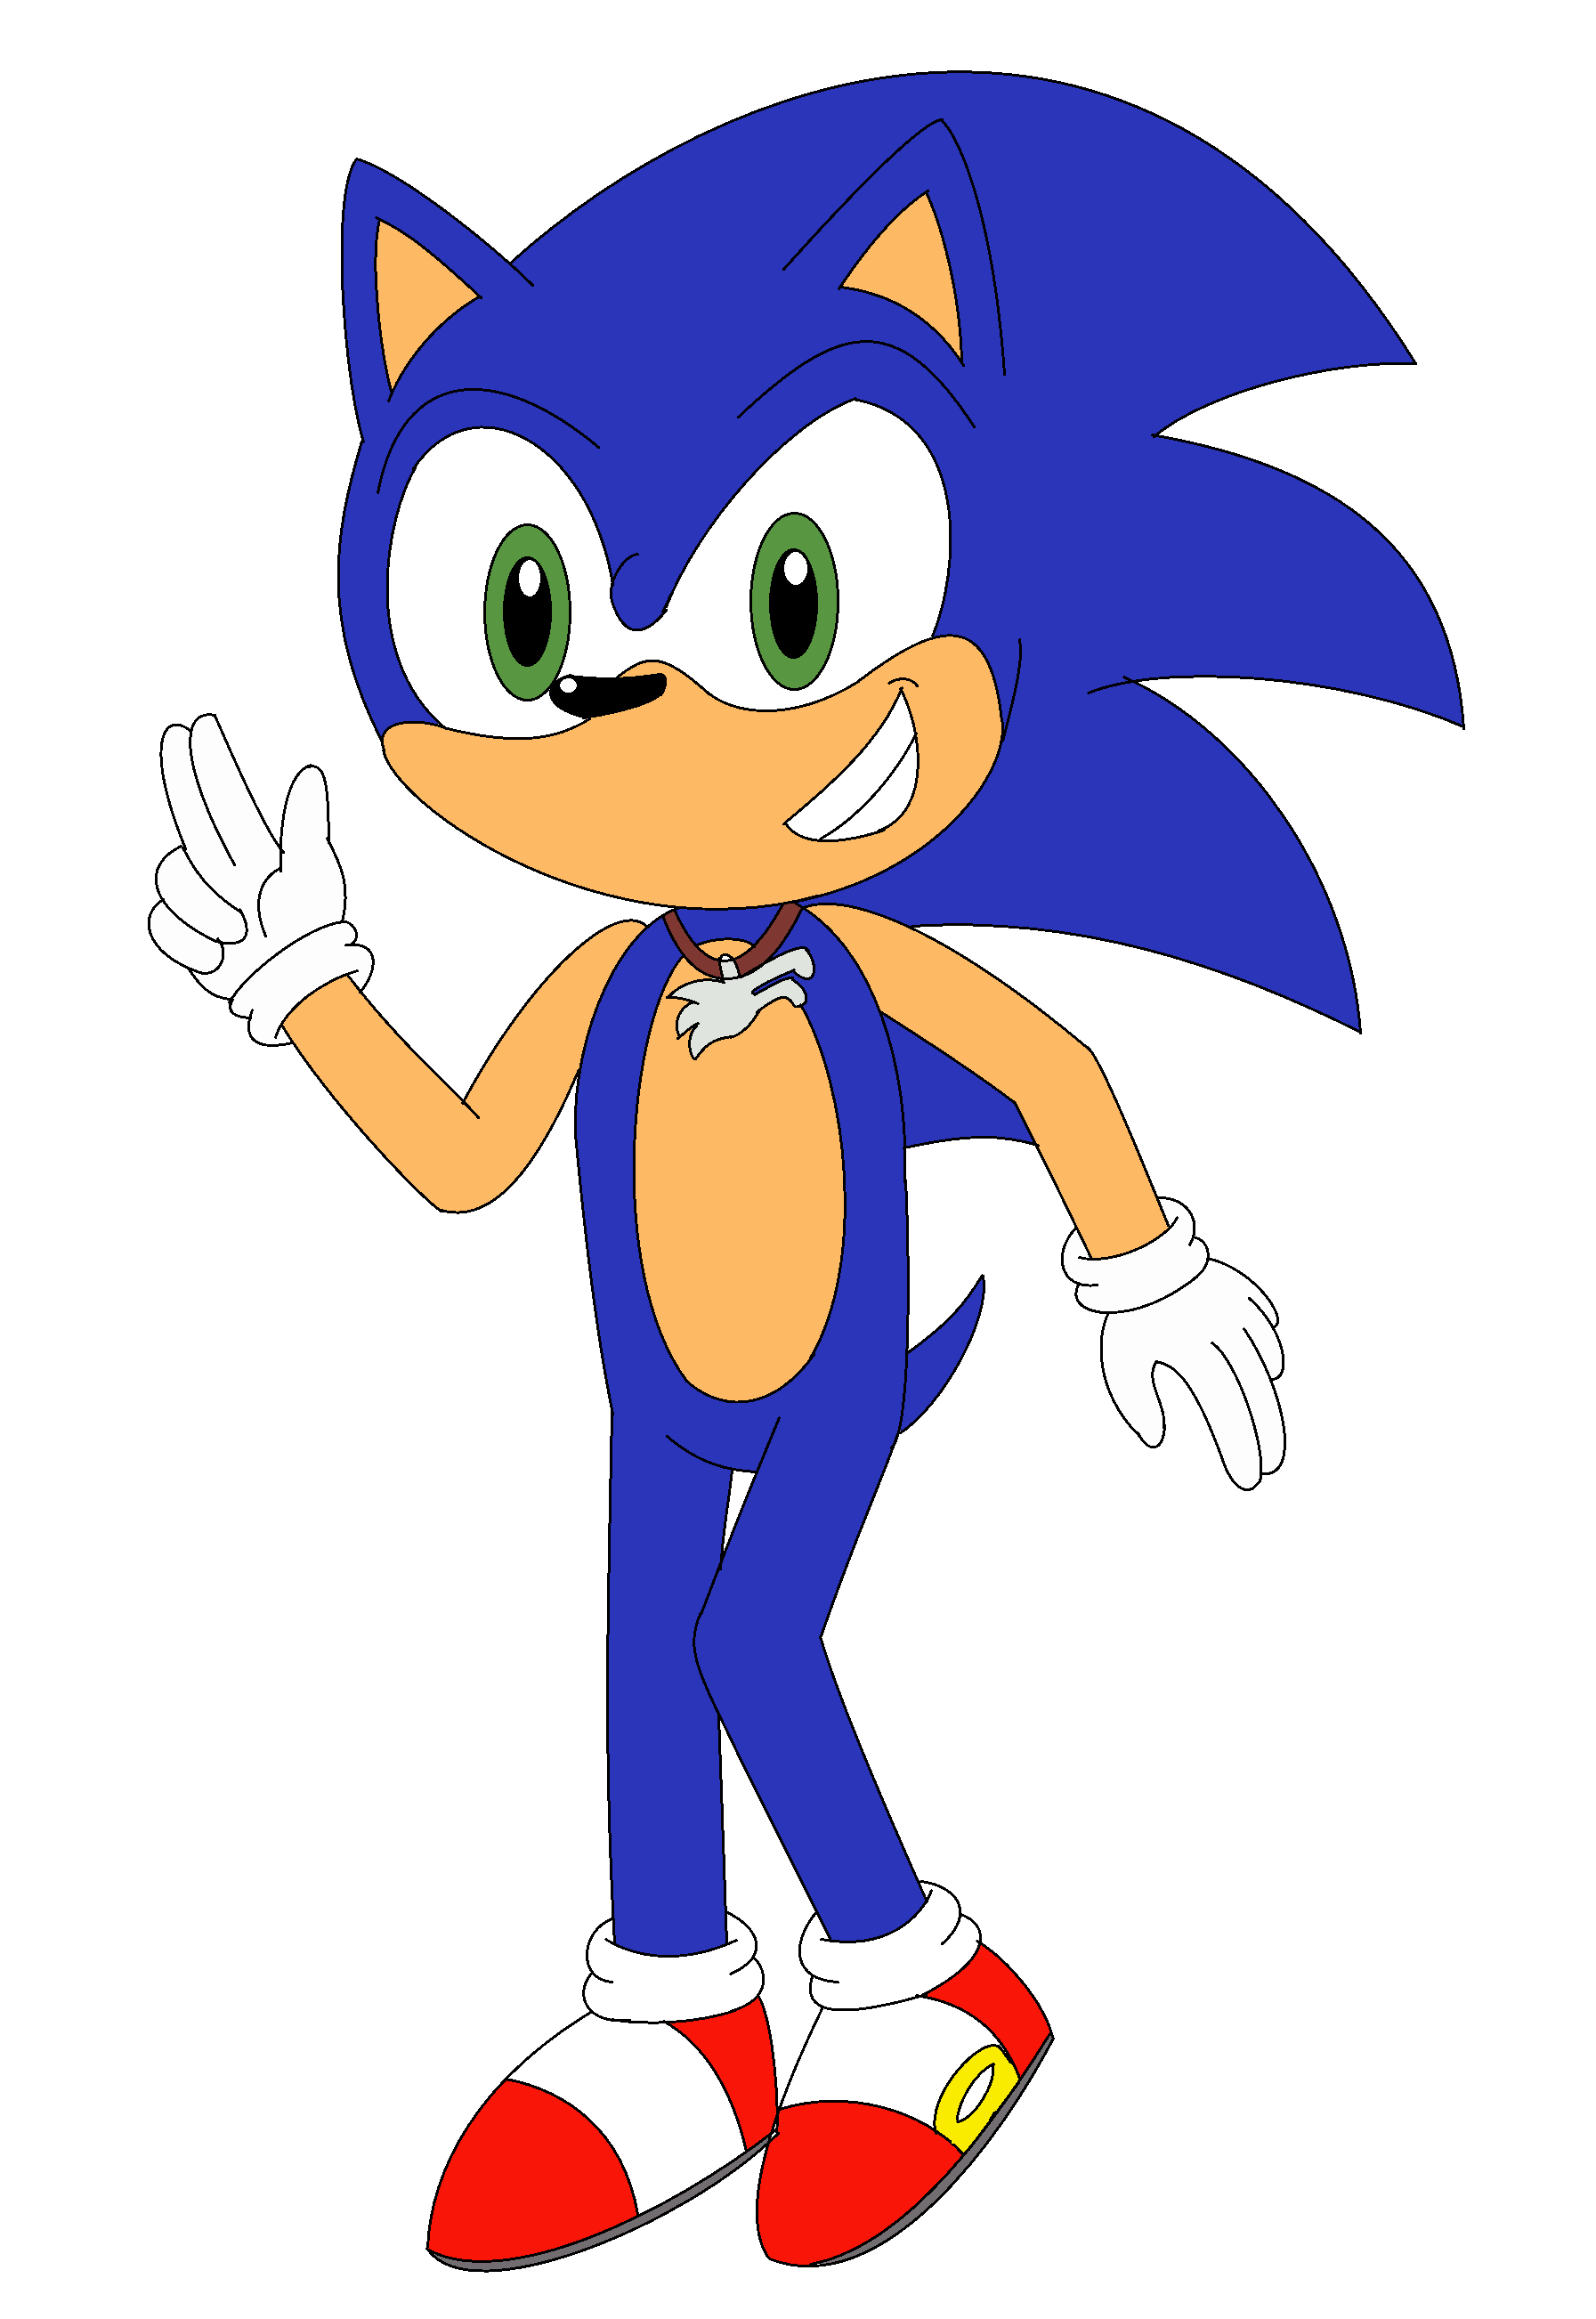 New Sonic the Hedgehog (1991) prototype uncovered by preservation